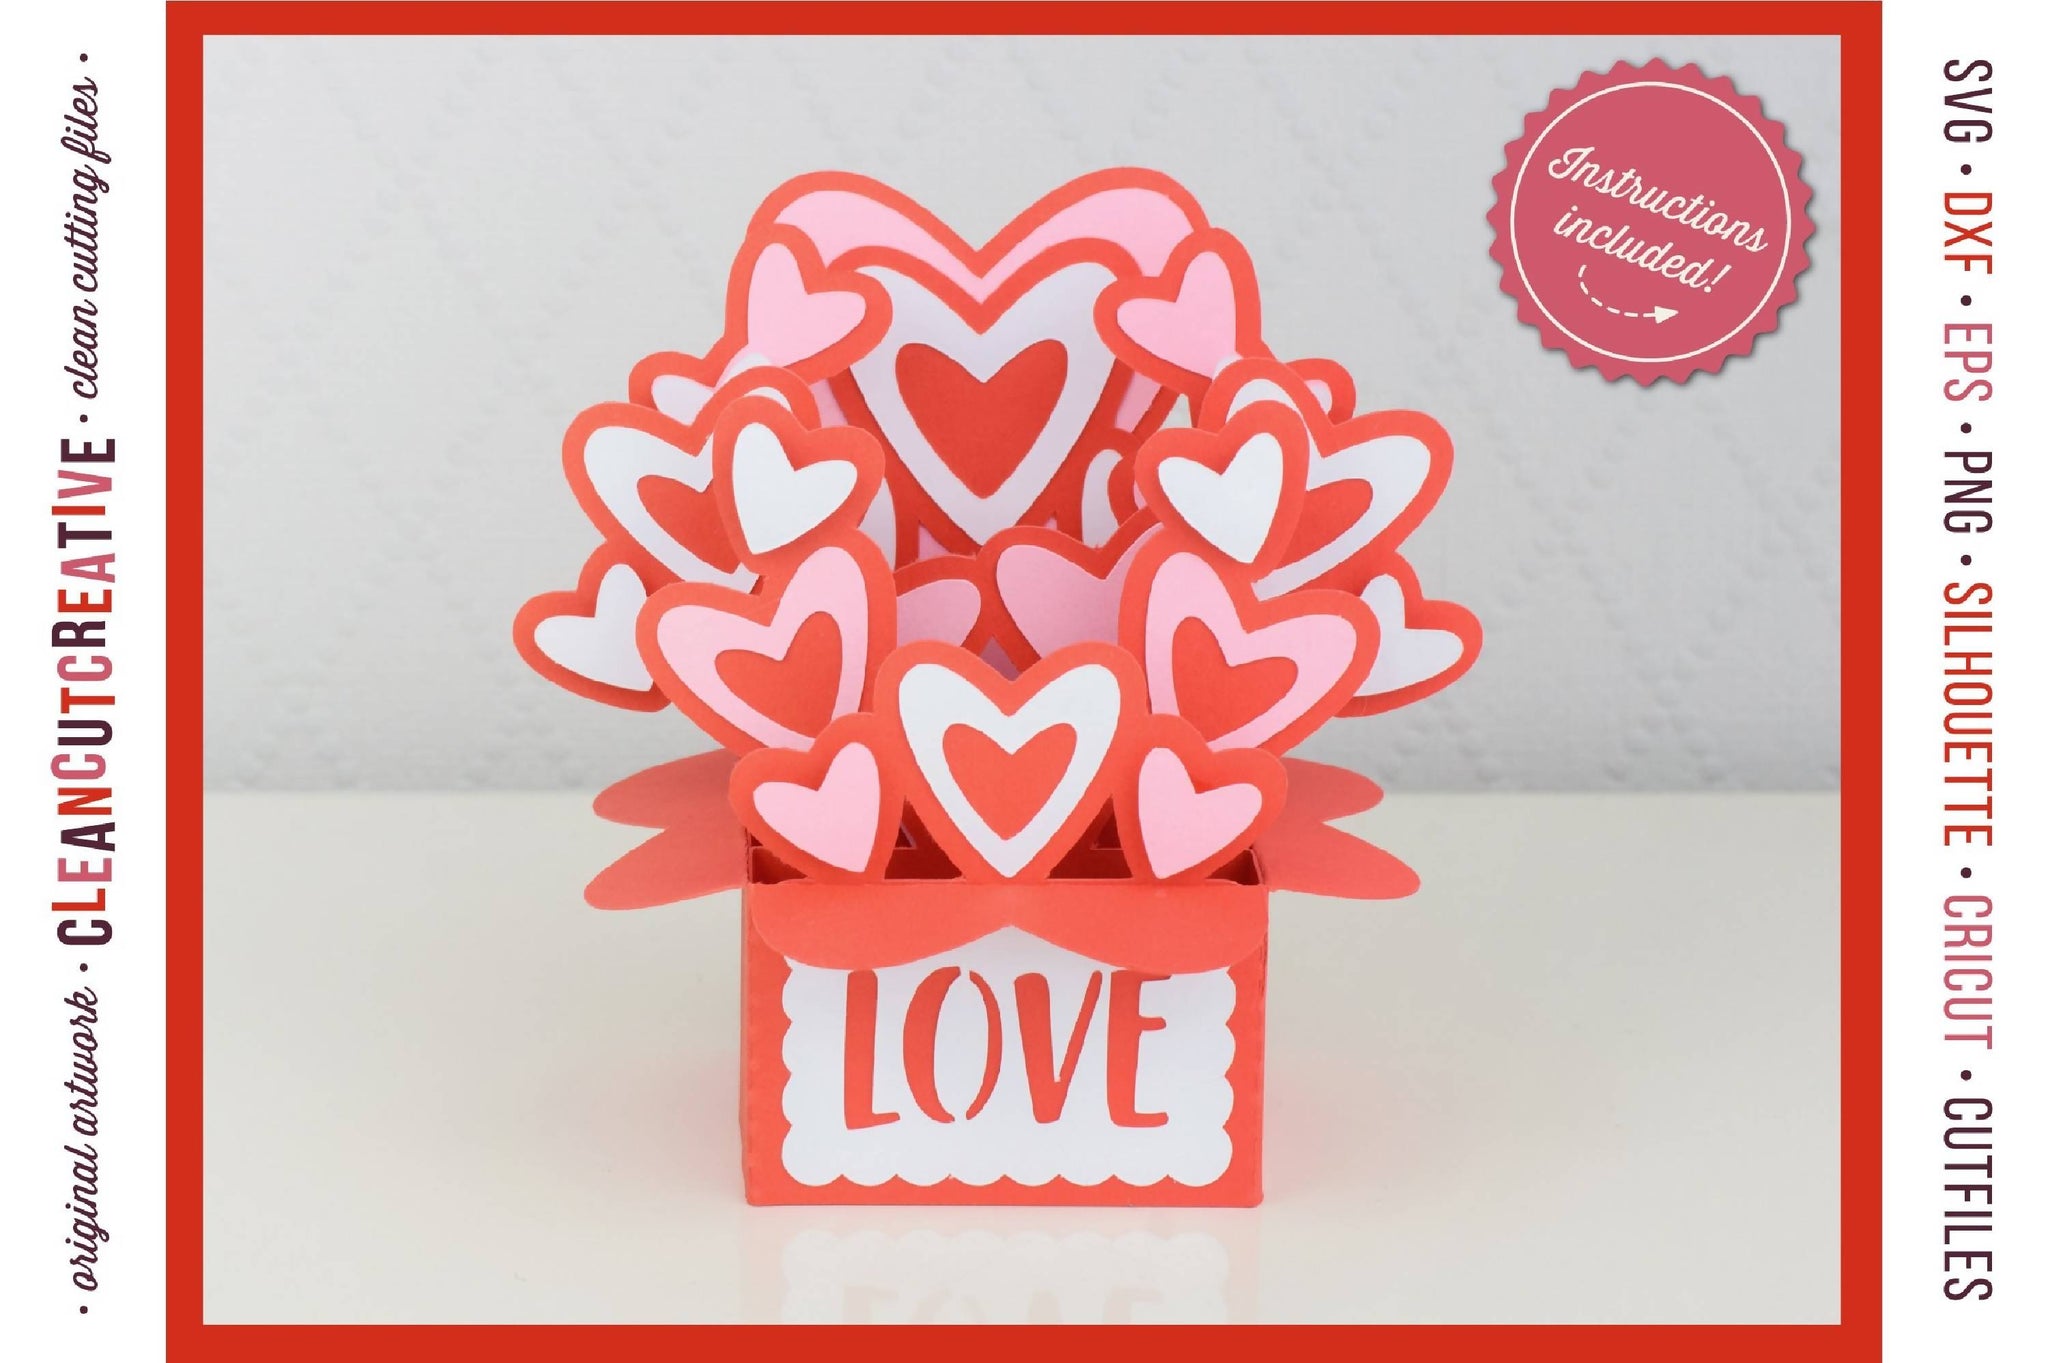 Download Valentine Pop Up Card Svg Pin On Cricut Crafts Cardology Couple Kissing Pop Up Card Engagement Wedding Anniversary Valentines